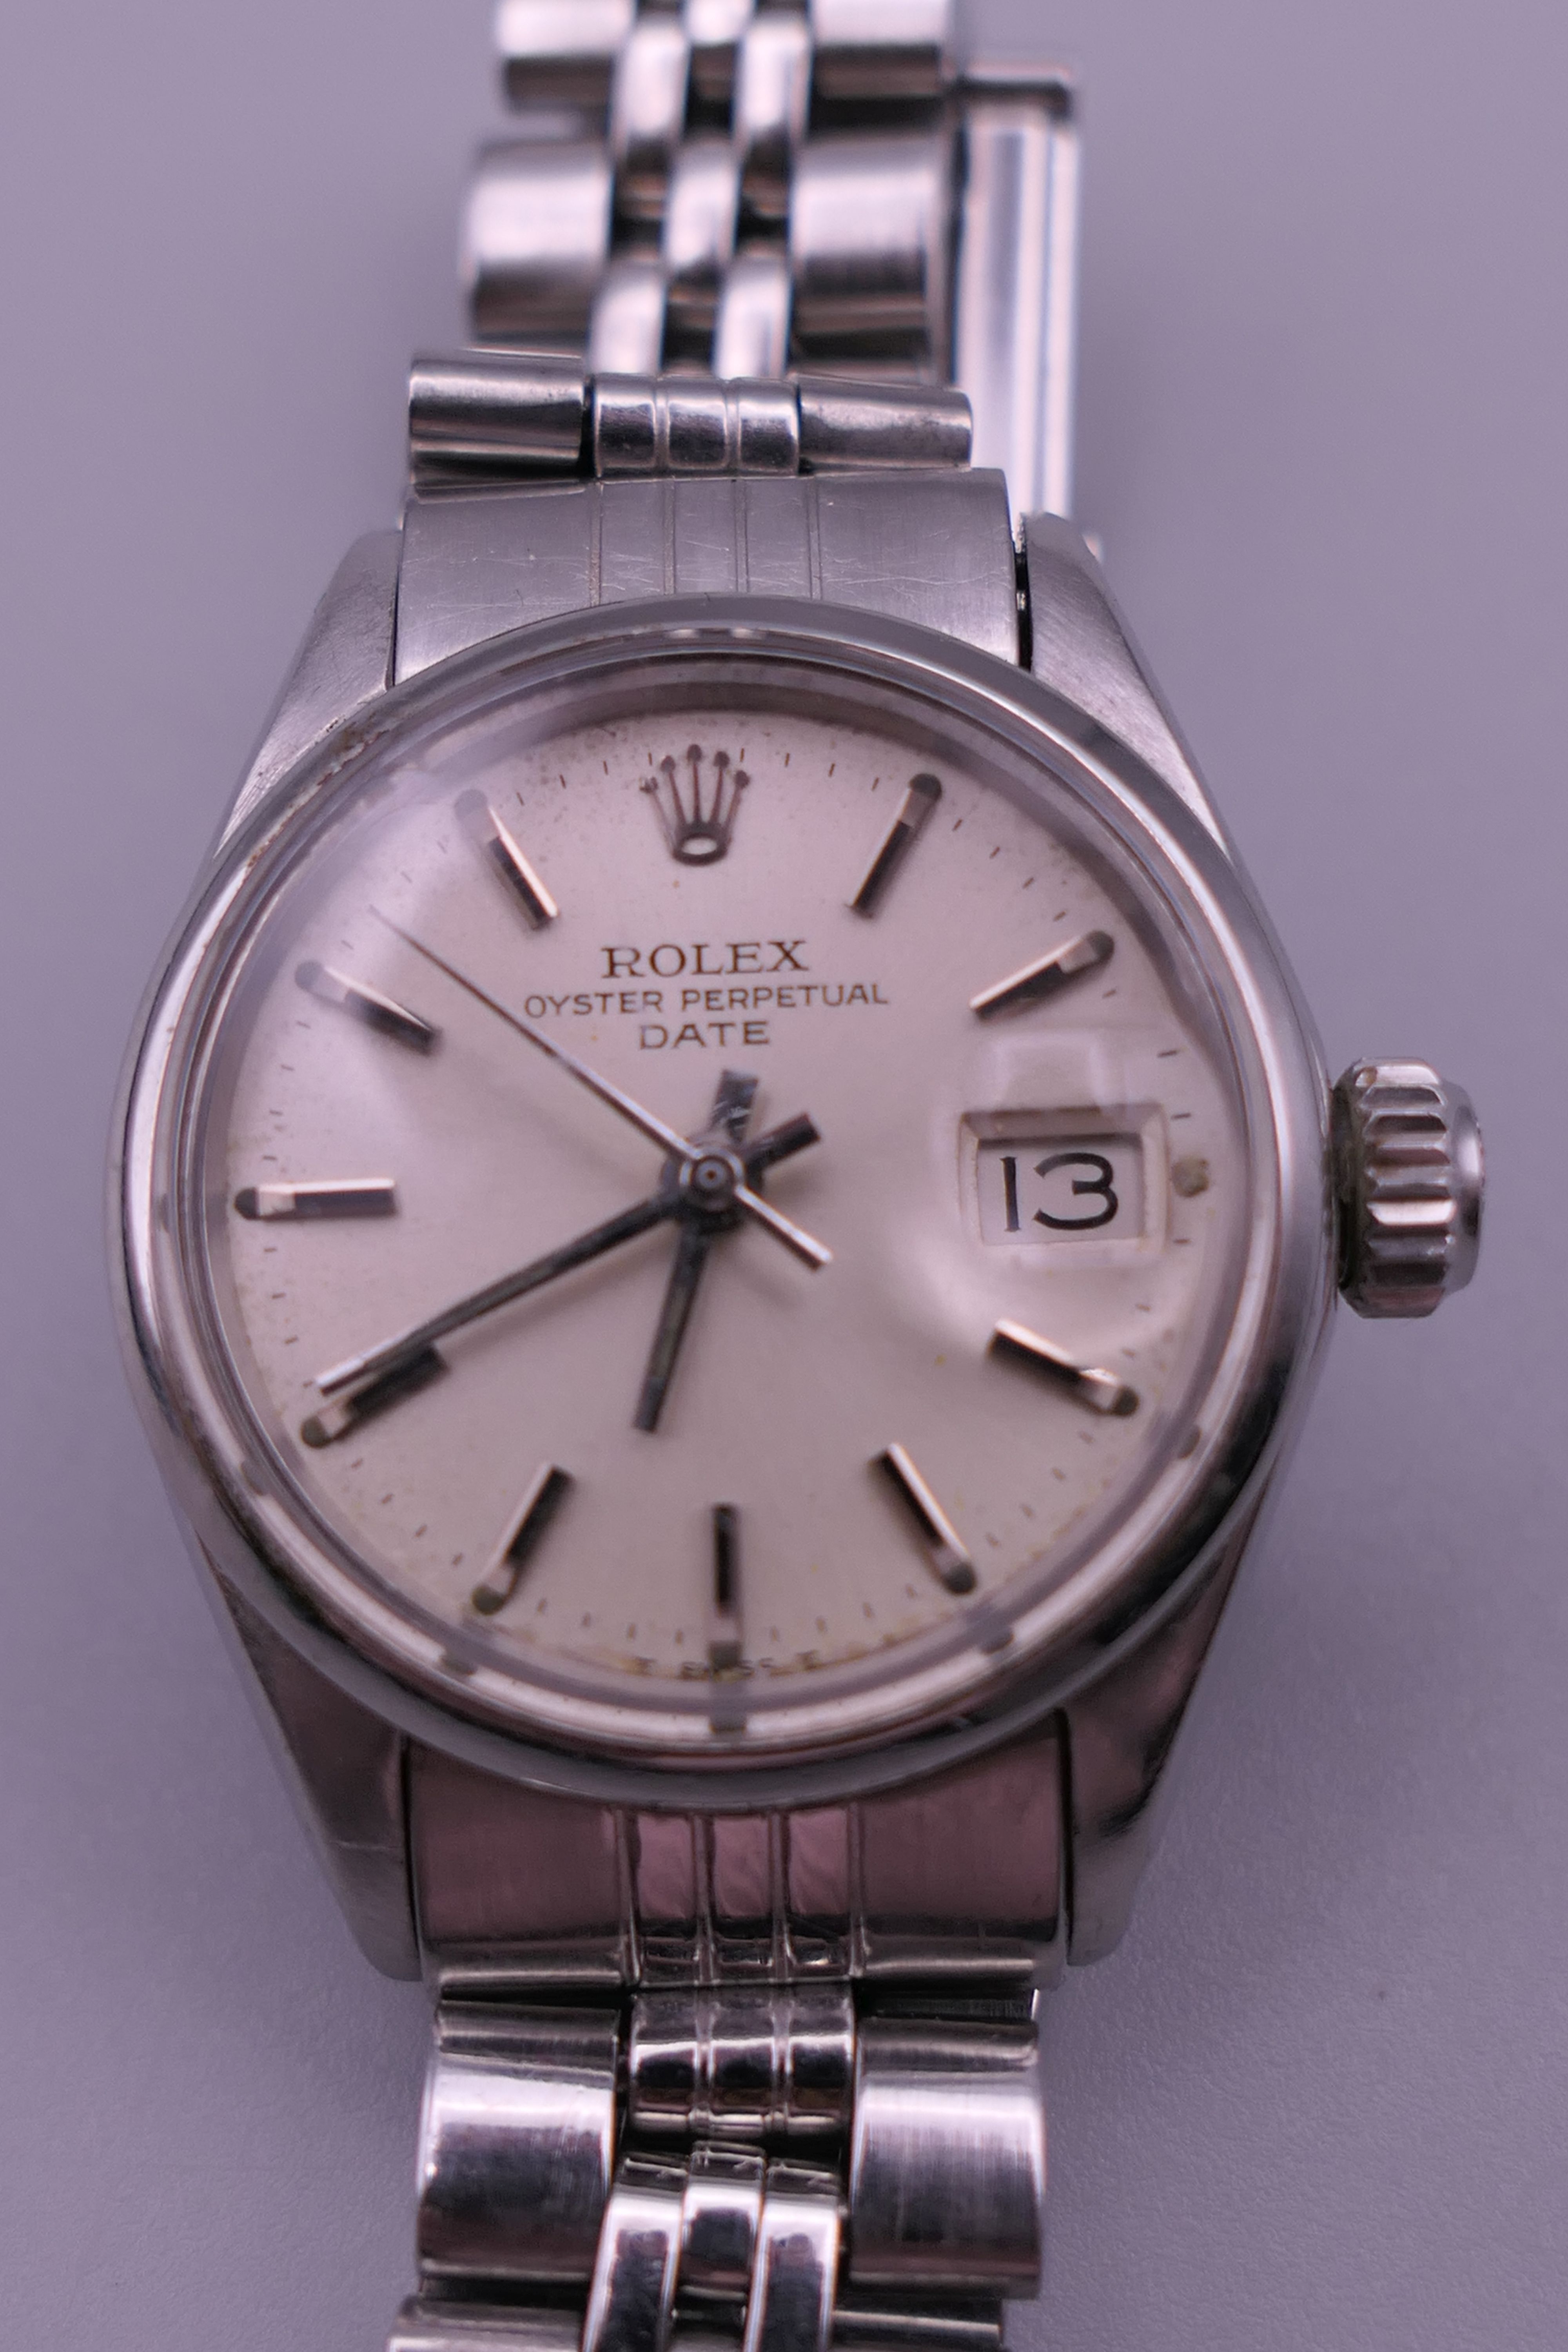 A ladies Rolex Oyster Perpetual Dated stainless steel wristwatch. 2.75 cm wide.